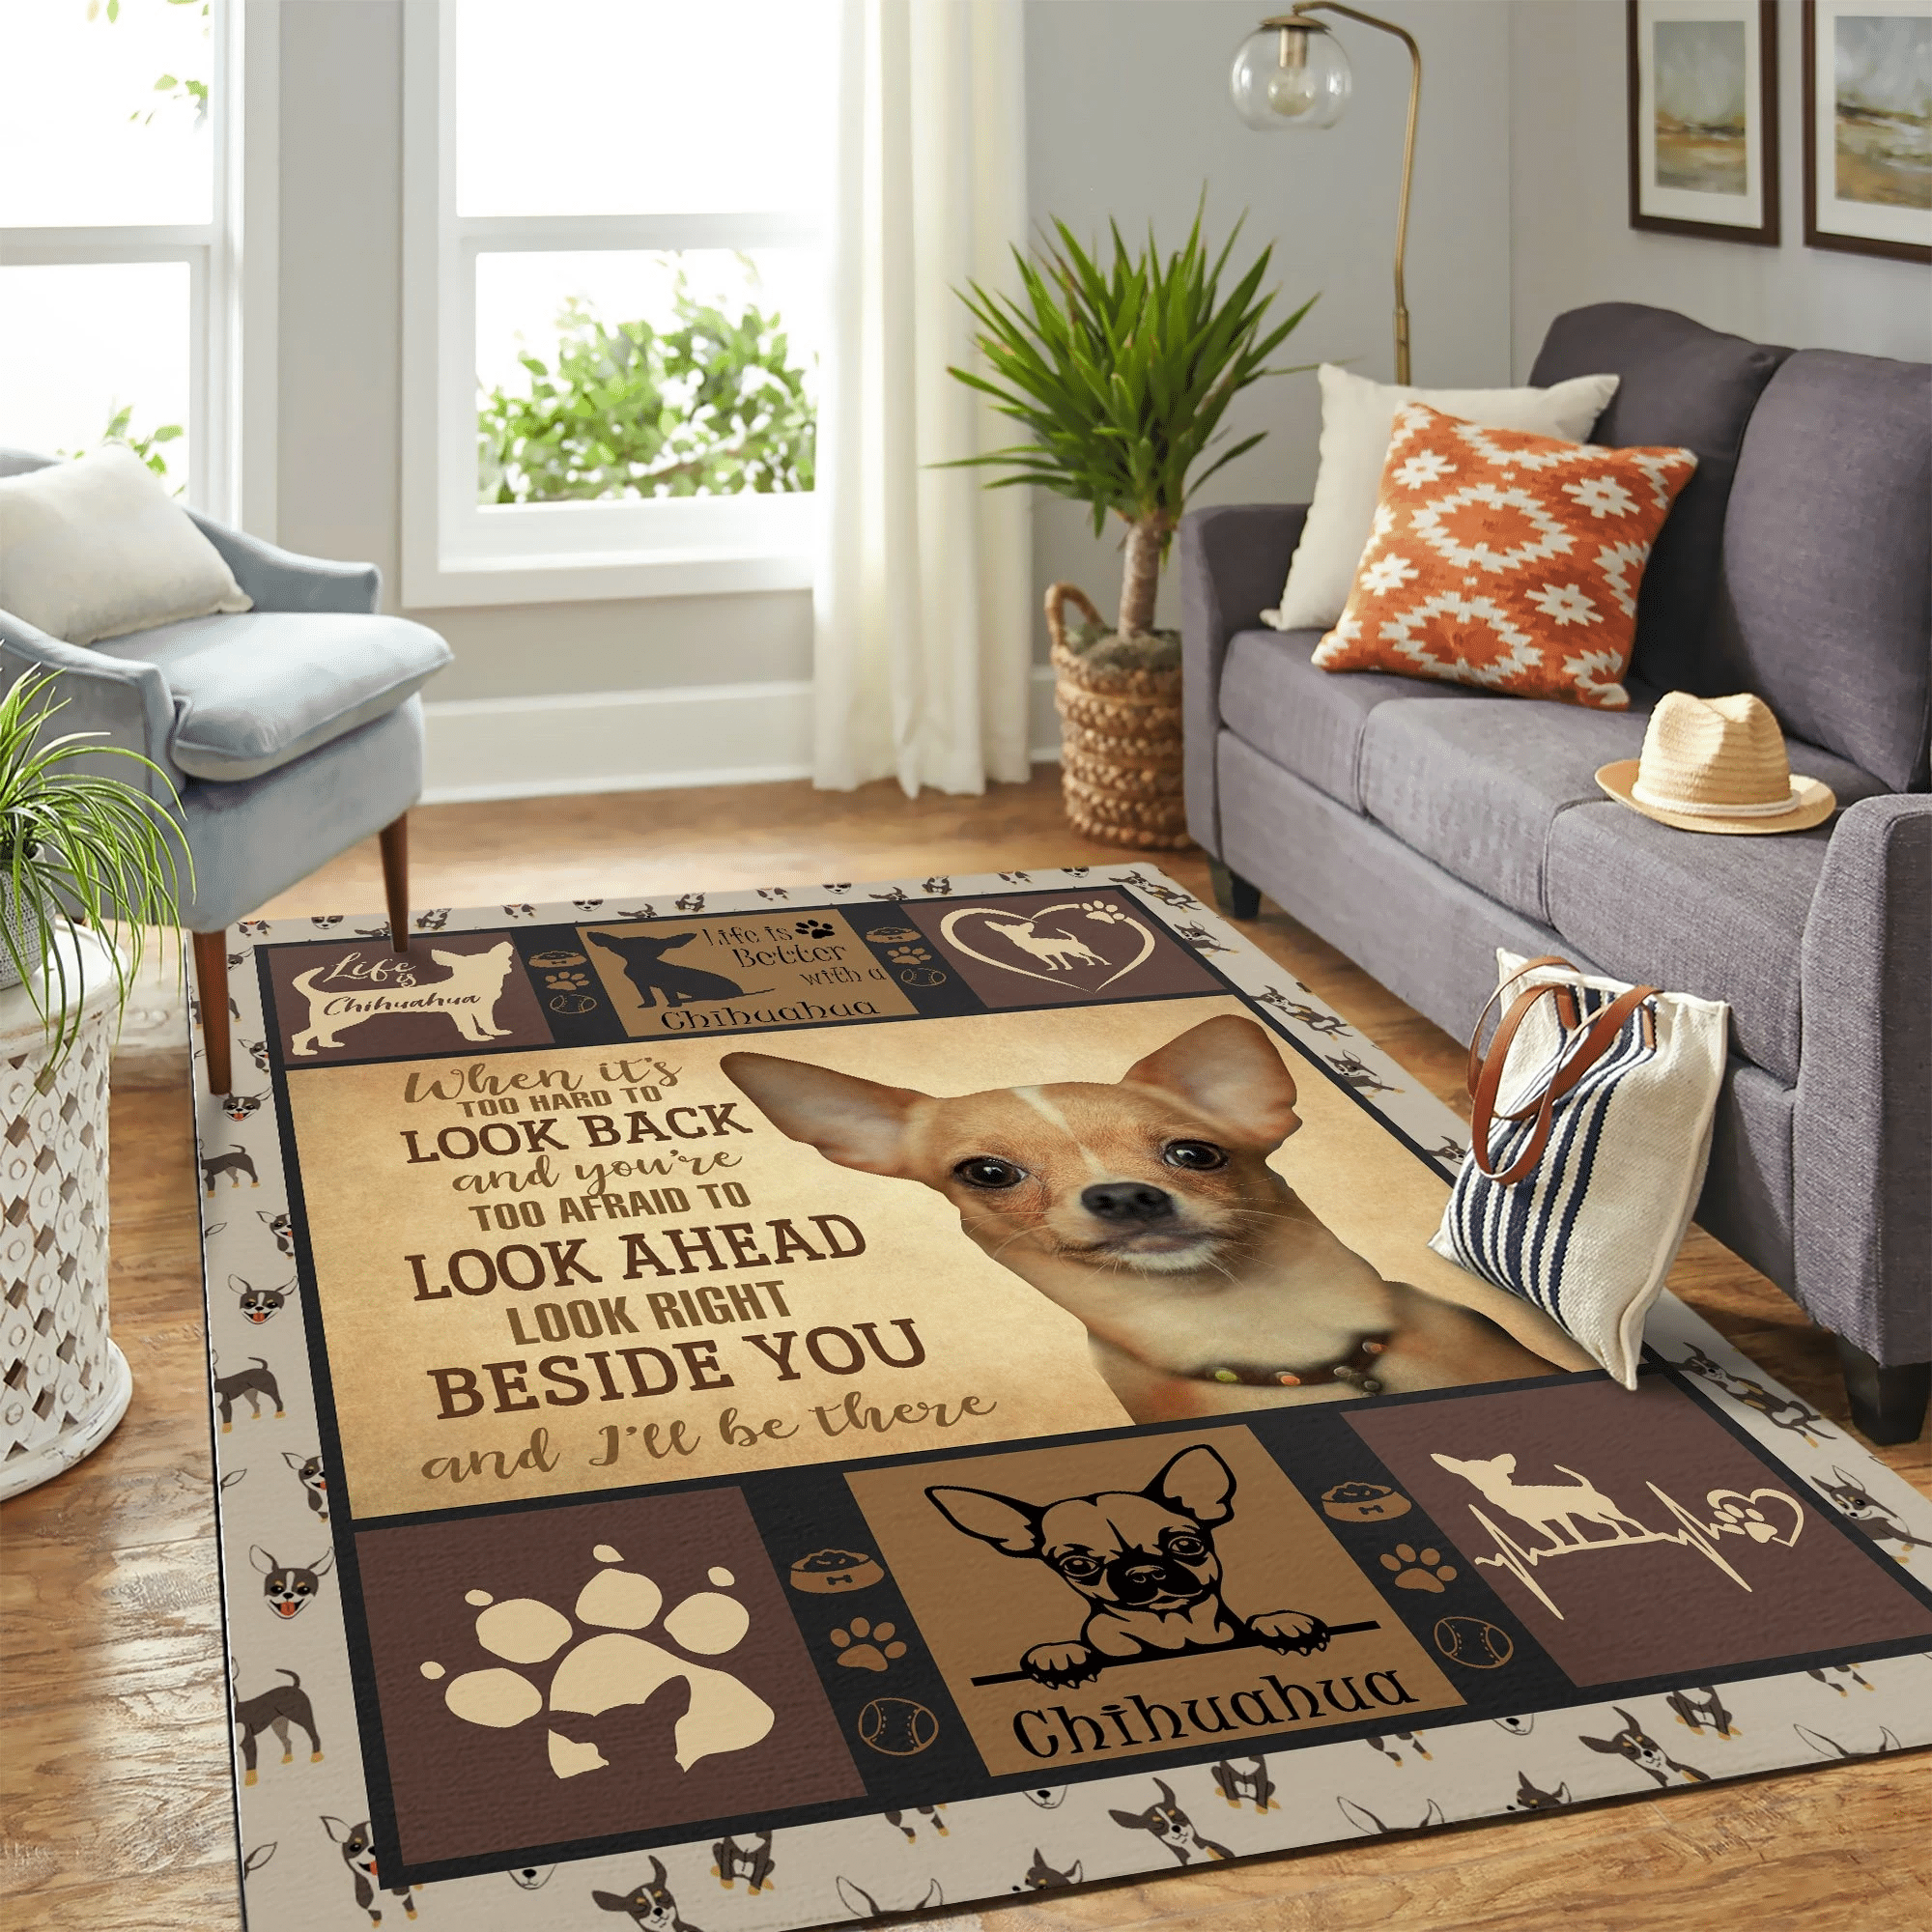 Chihuahua Vq Quilt Mk Carpet Area Rug Chrismas Gift - Indoor Outdoor Rugs